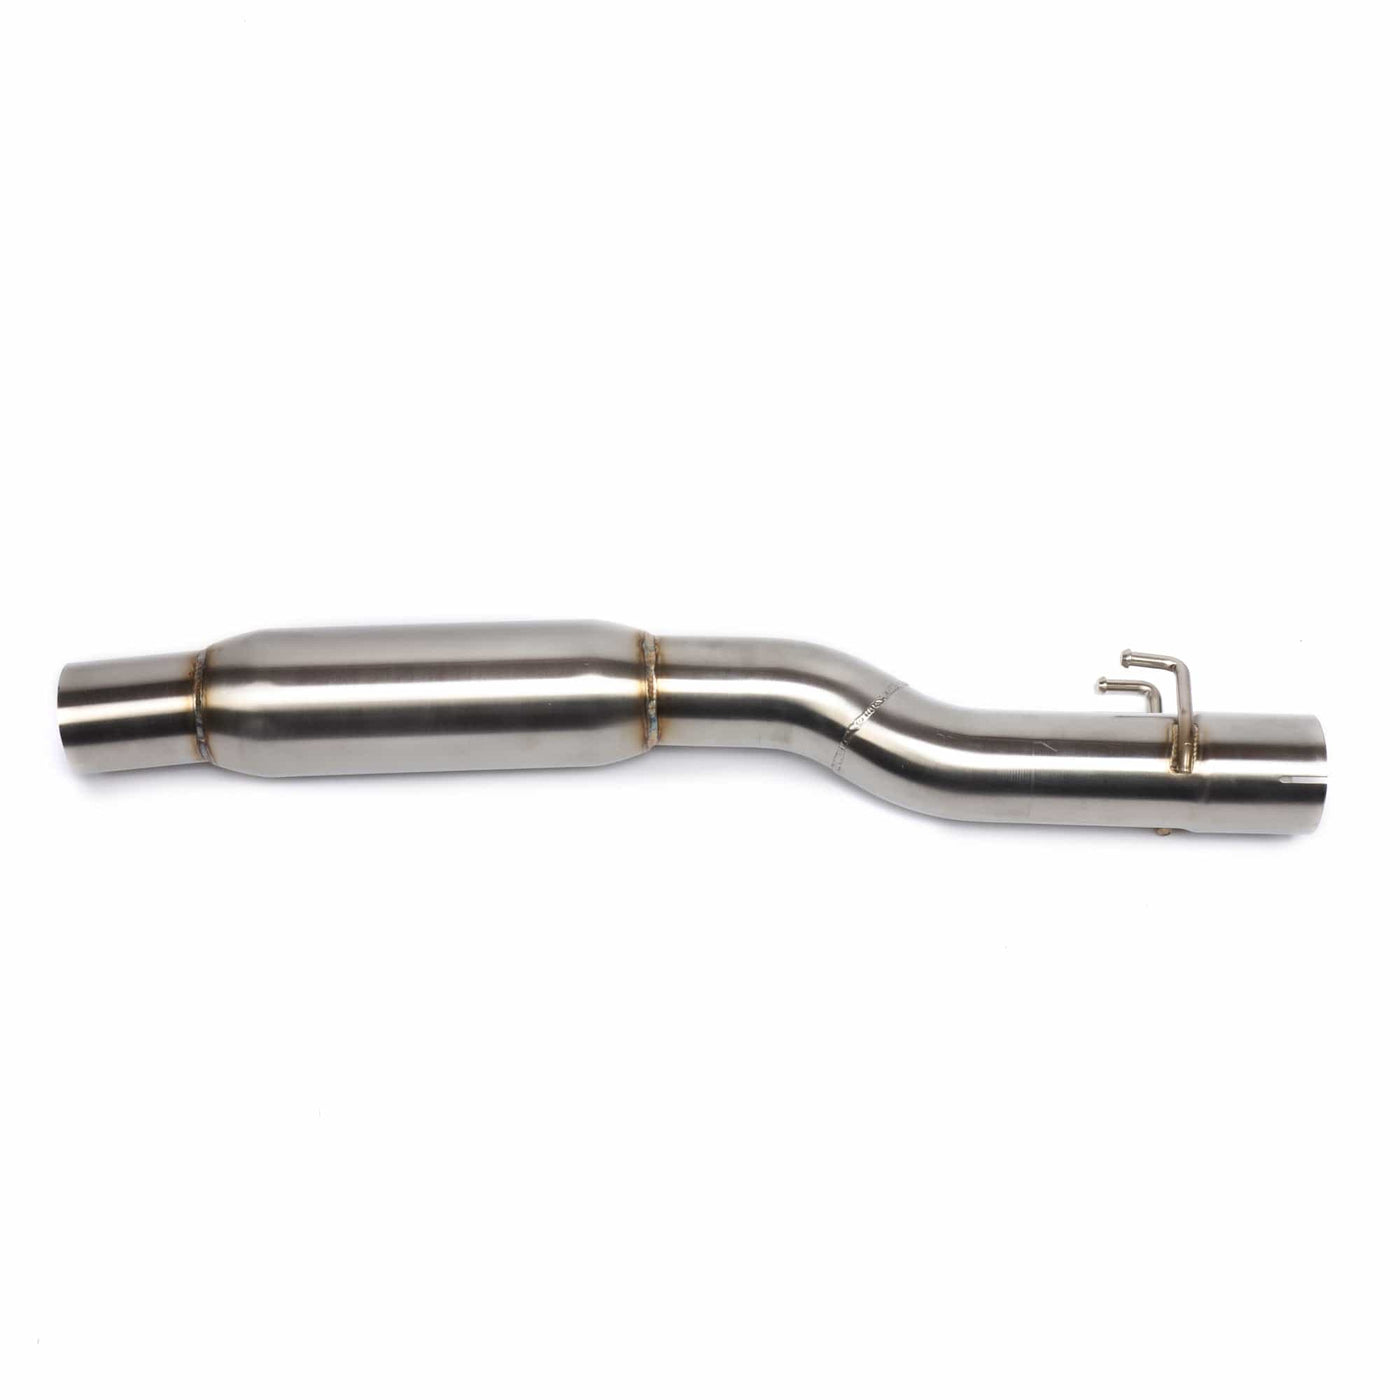 DC Sports Exhaust DC Sports Exhaust System for 22+ Civic Si & 22+ Integra